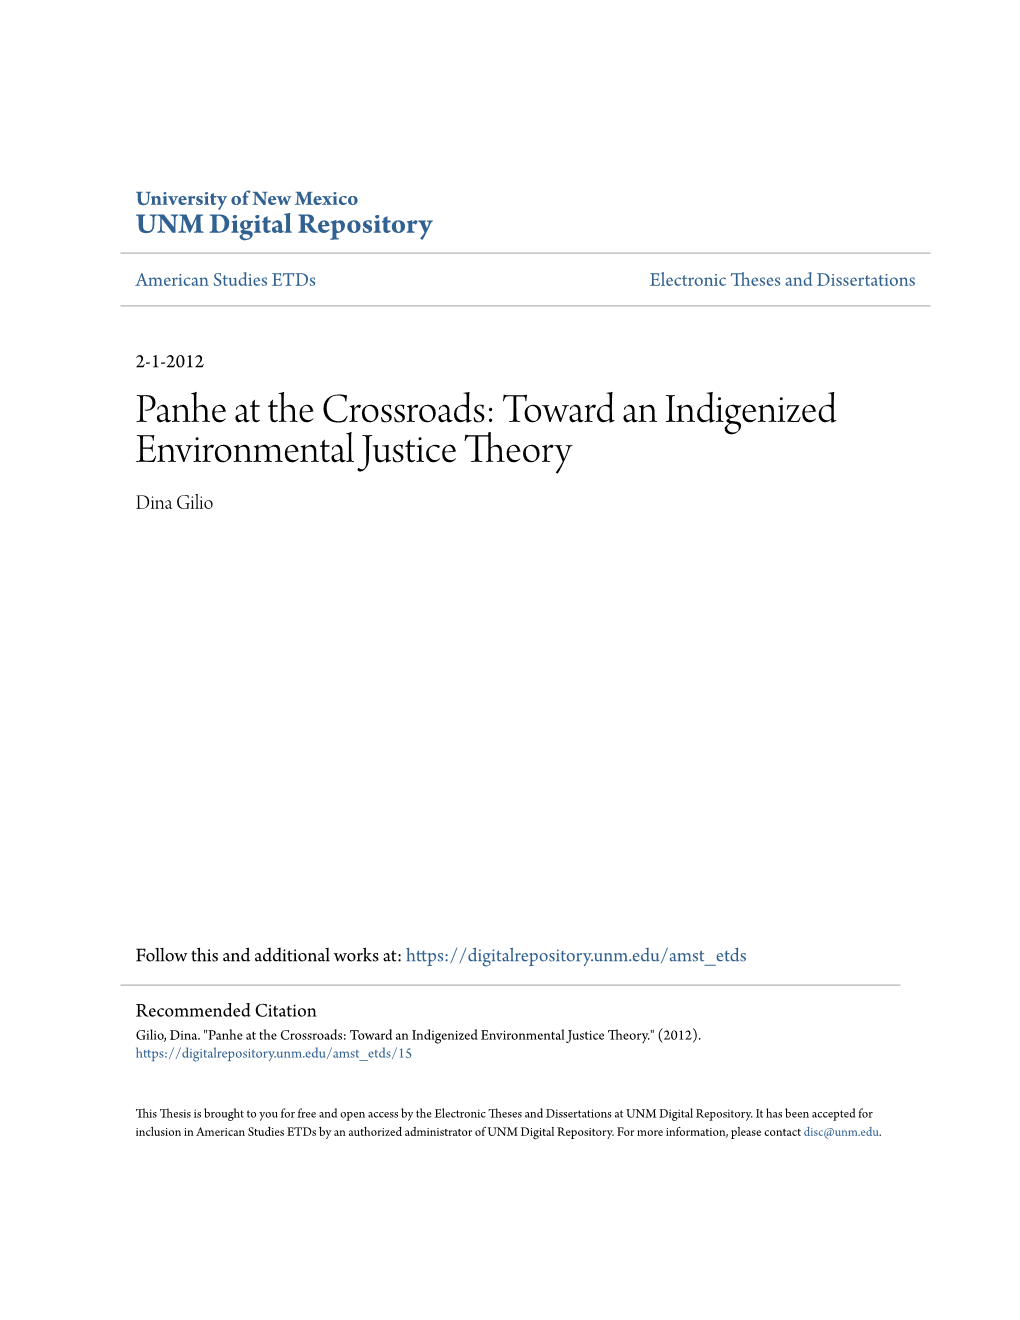 Panhe at the Crossroads: Toward an Indigenized Environmental Justice Theory Dina Gilio